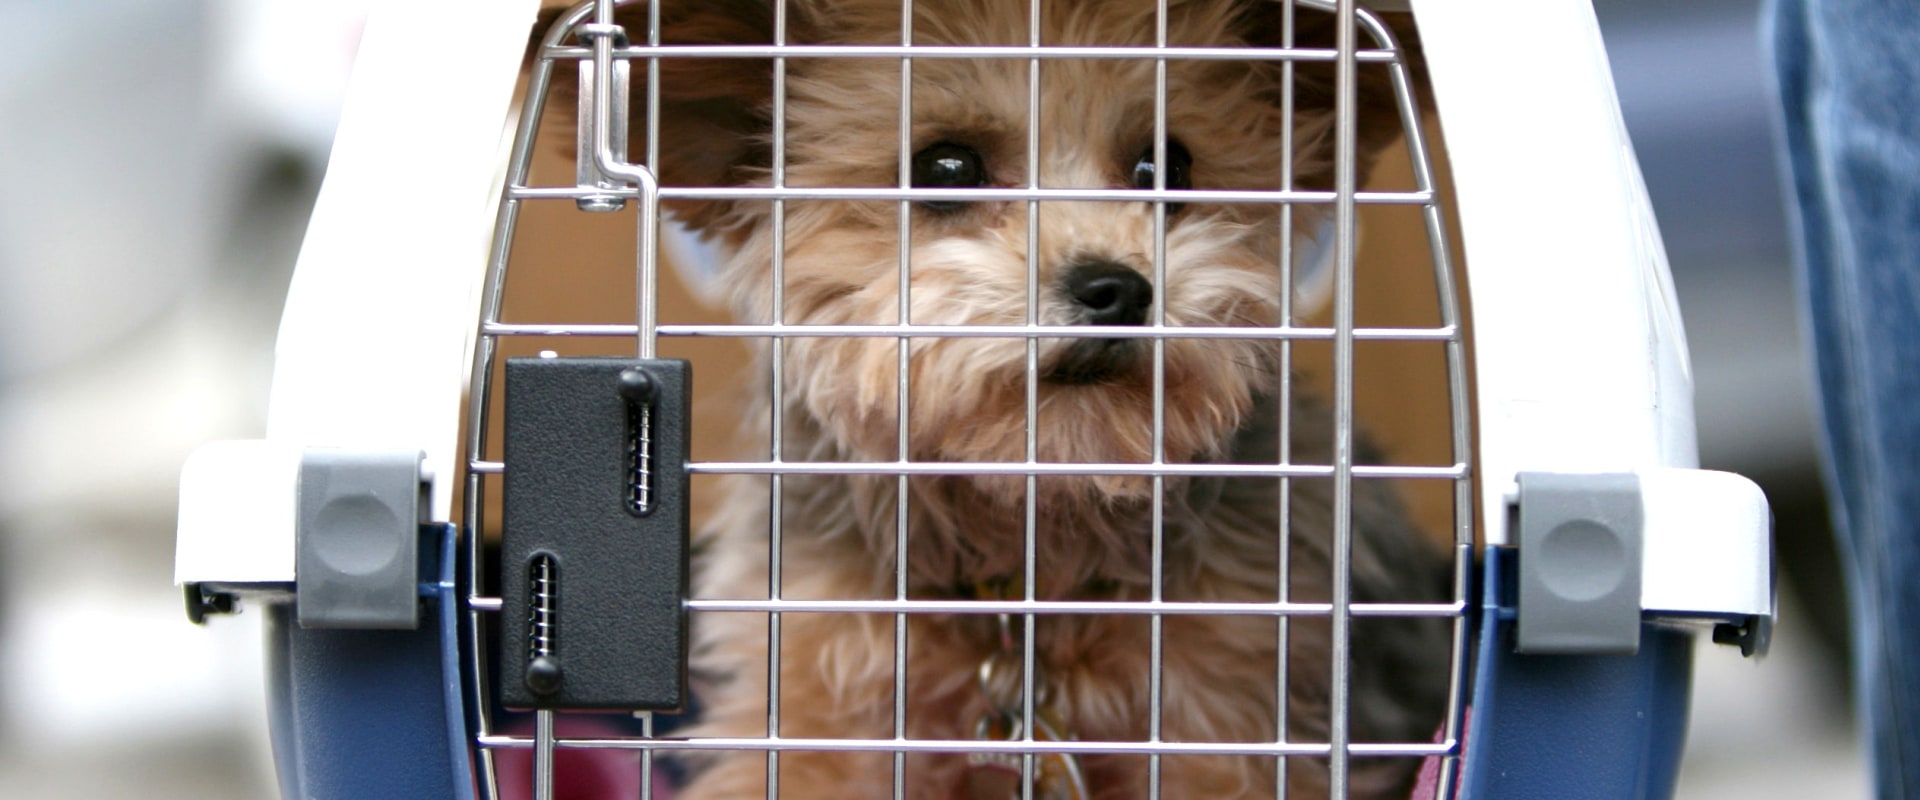 Is it possible to cancel or change an existing booking with a dog kennel service?